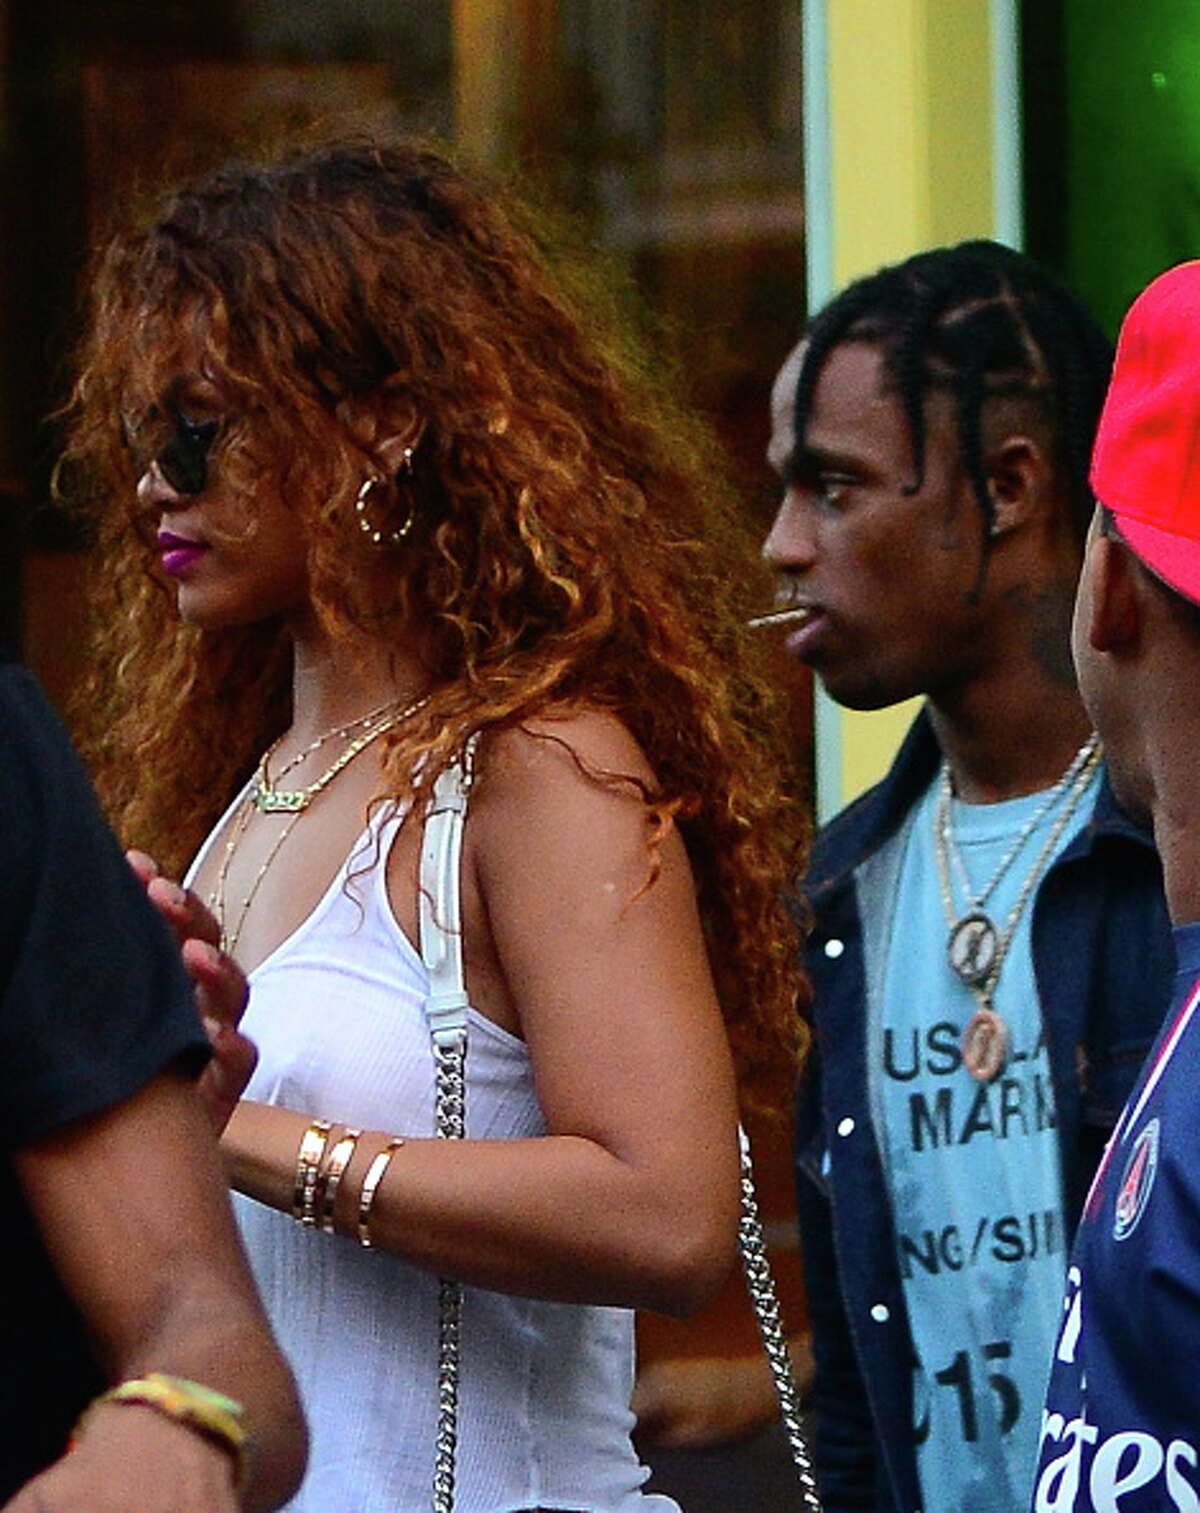 NEW YORK, NY - AUGUST 12: Singer Rihanna and Travis Scott are seen coming out of Coppelia restaurant in Soho on August 12, 2015 in New York City. (Photo by Raymond Hall/GC Images)